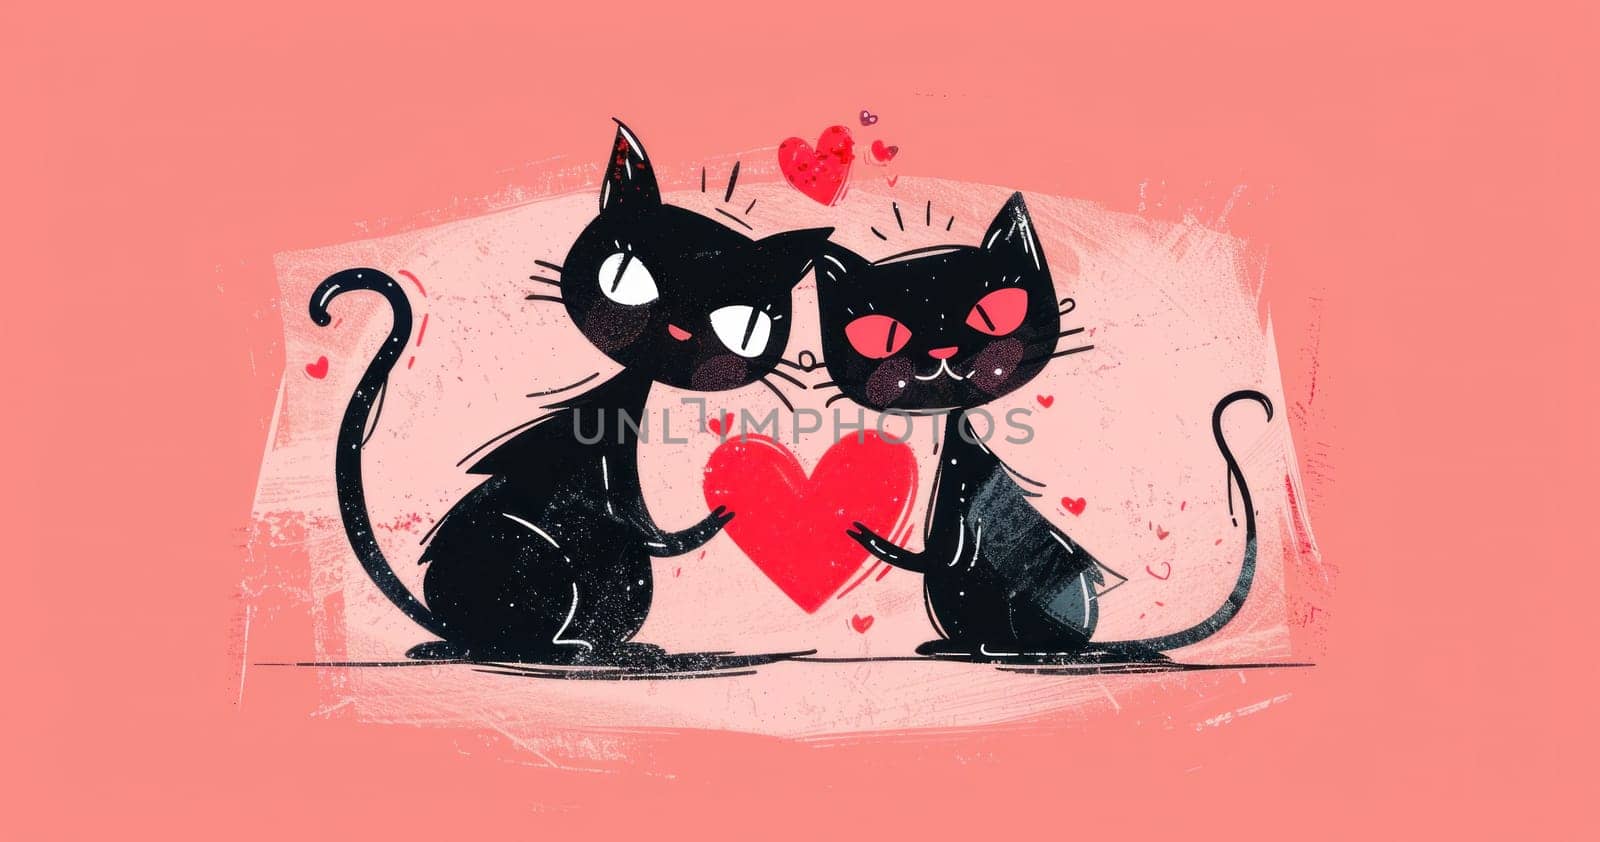 Love and companionship two black cats holding heart on pink background symbolizing unity and affection